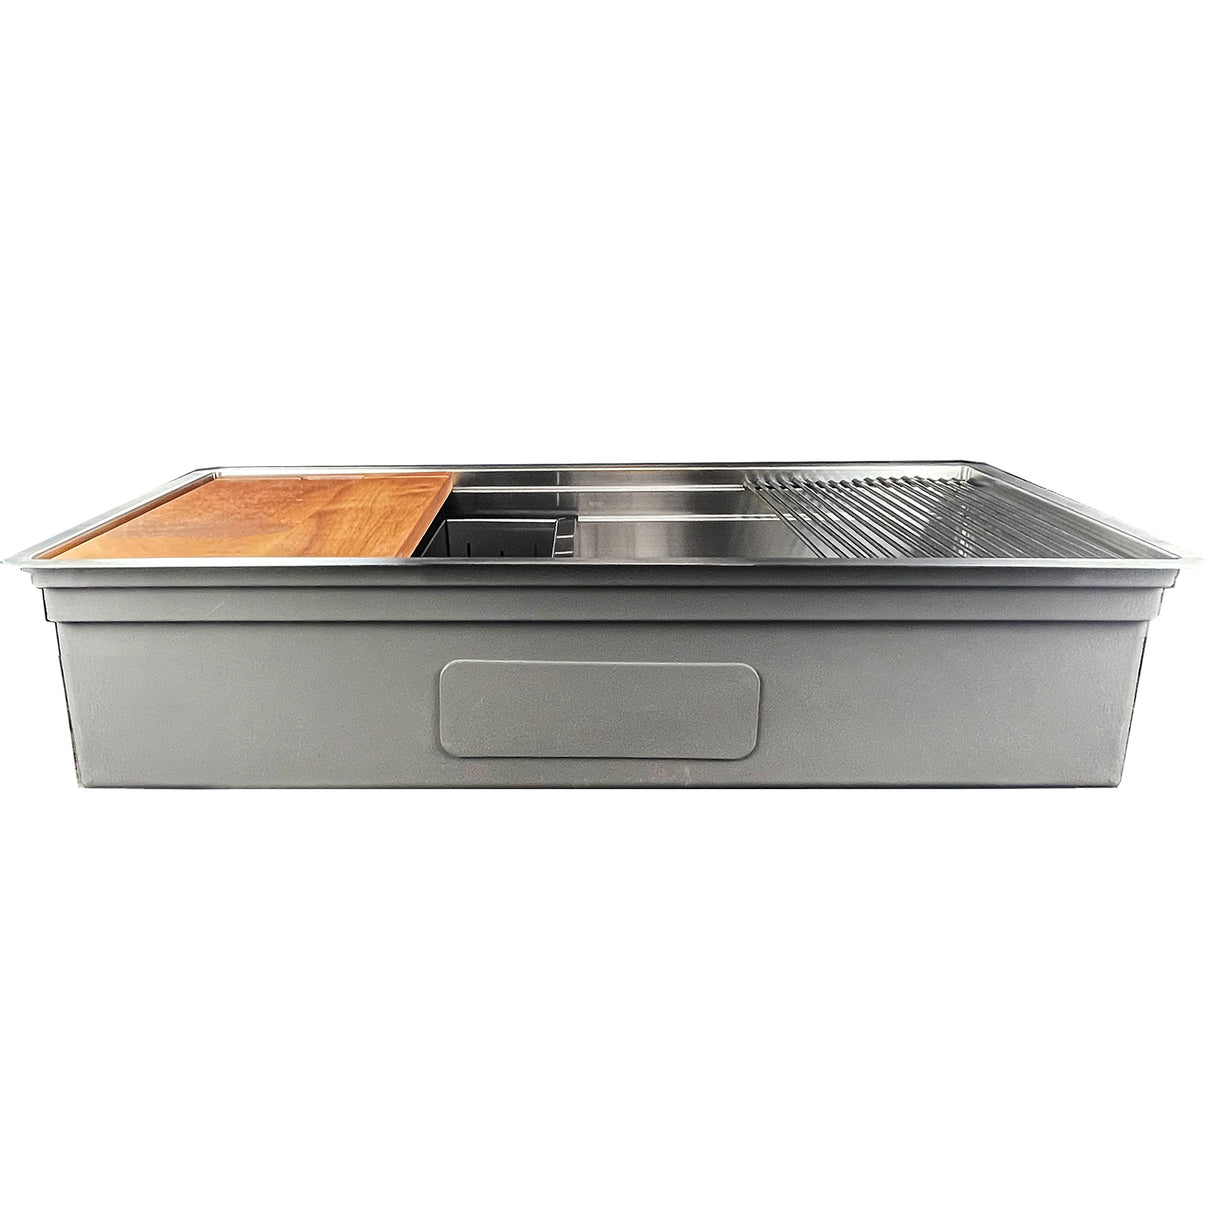 Nantucket Sinks' SR-PS-4220-16  Small Radius 42Inch Pro Series Large Prep Station Single Bowl Undermount Stainless Steel Kitchen Sink with Compatible Accessories